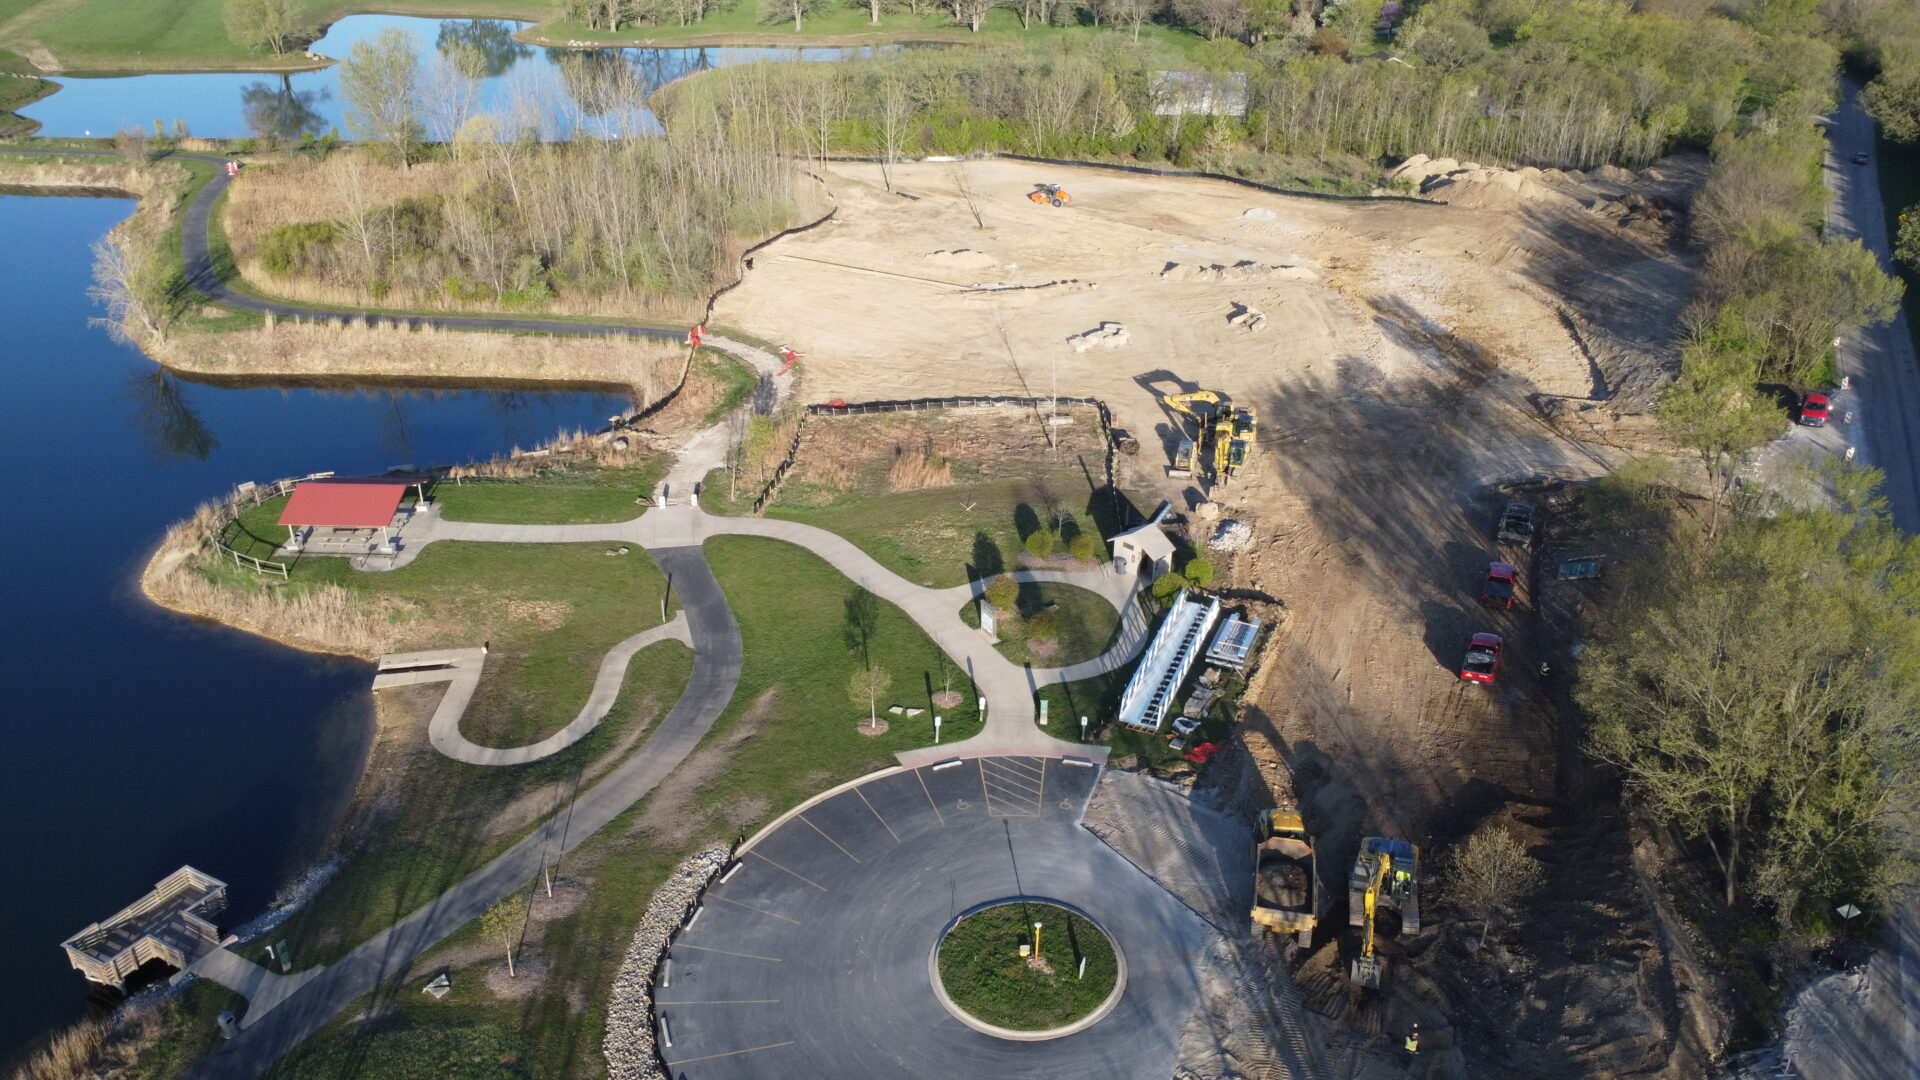 Aerial view of construction site near a scenic lake.